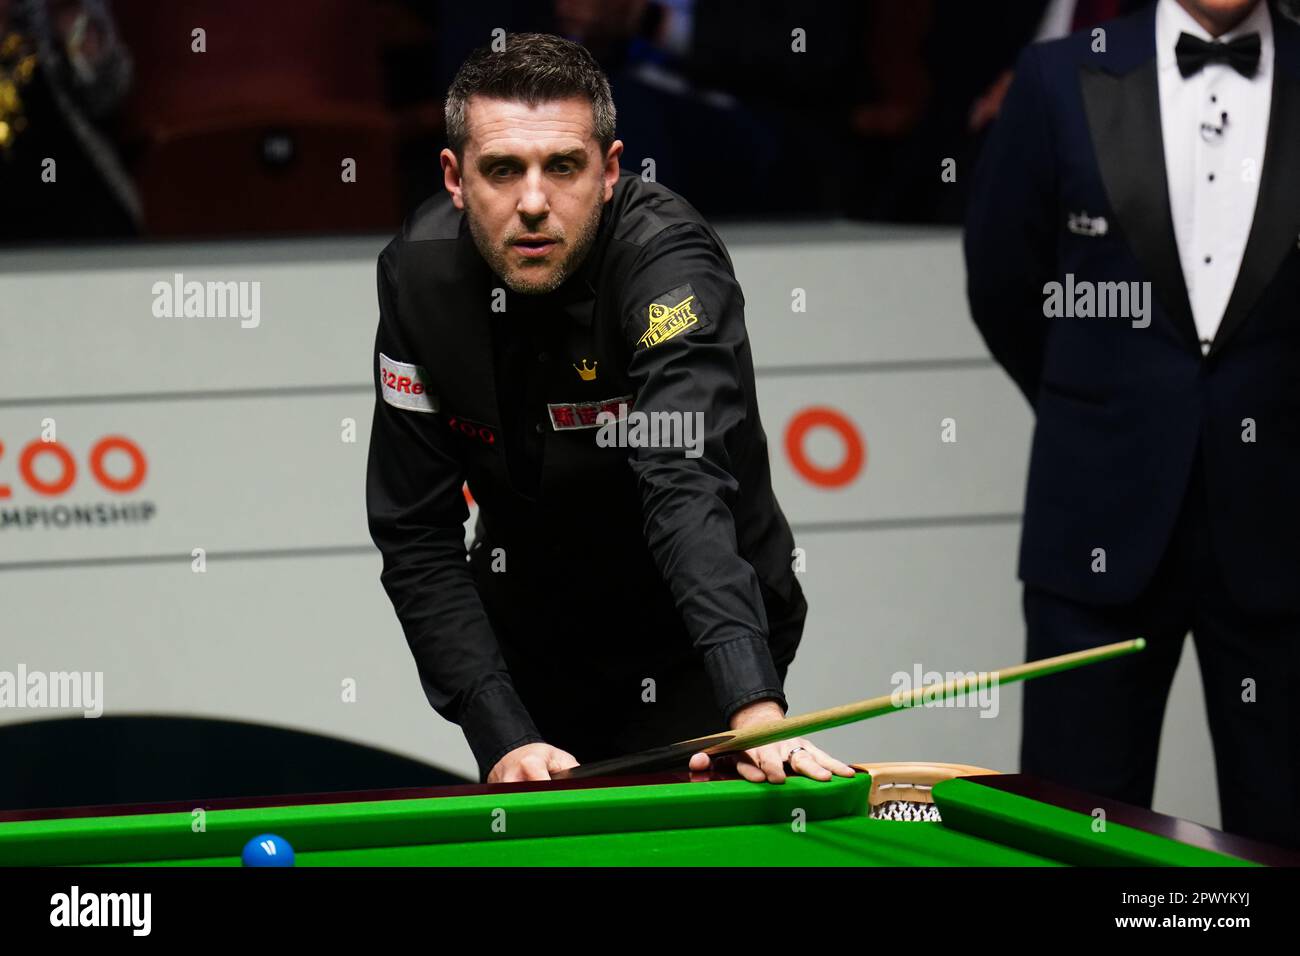 Mark Selby in action against Luca Brecel (not pictured) during the final on day seventeen of the Cazoo World Snooker Championship at the Crucible Theatre, Sheffield